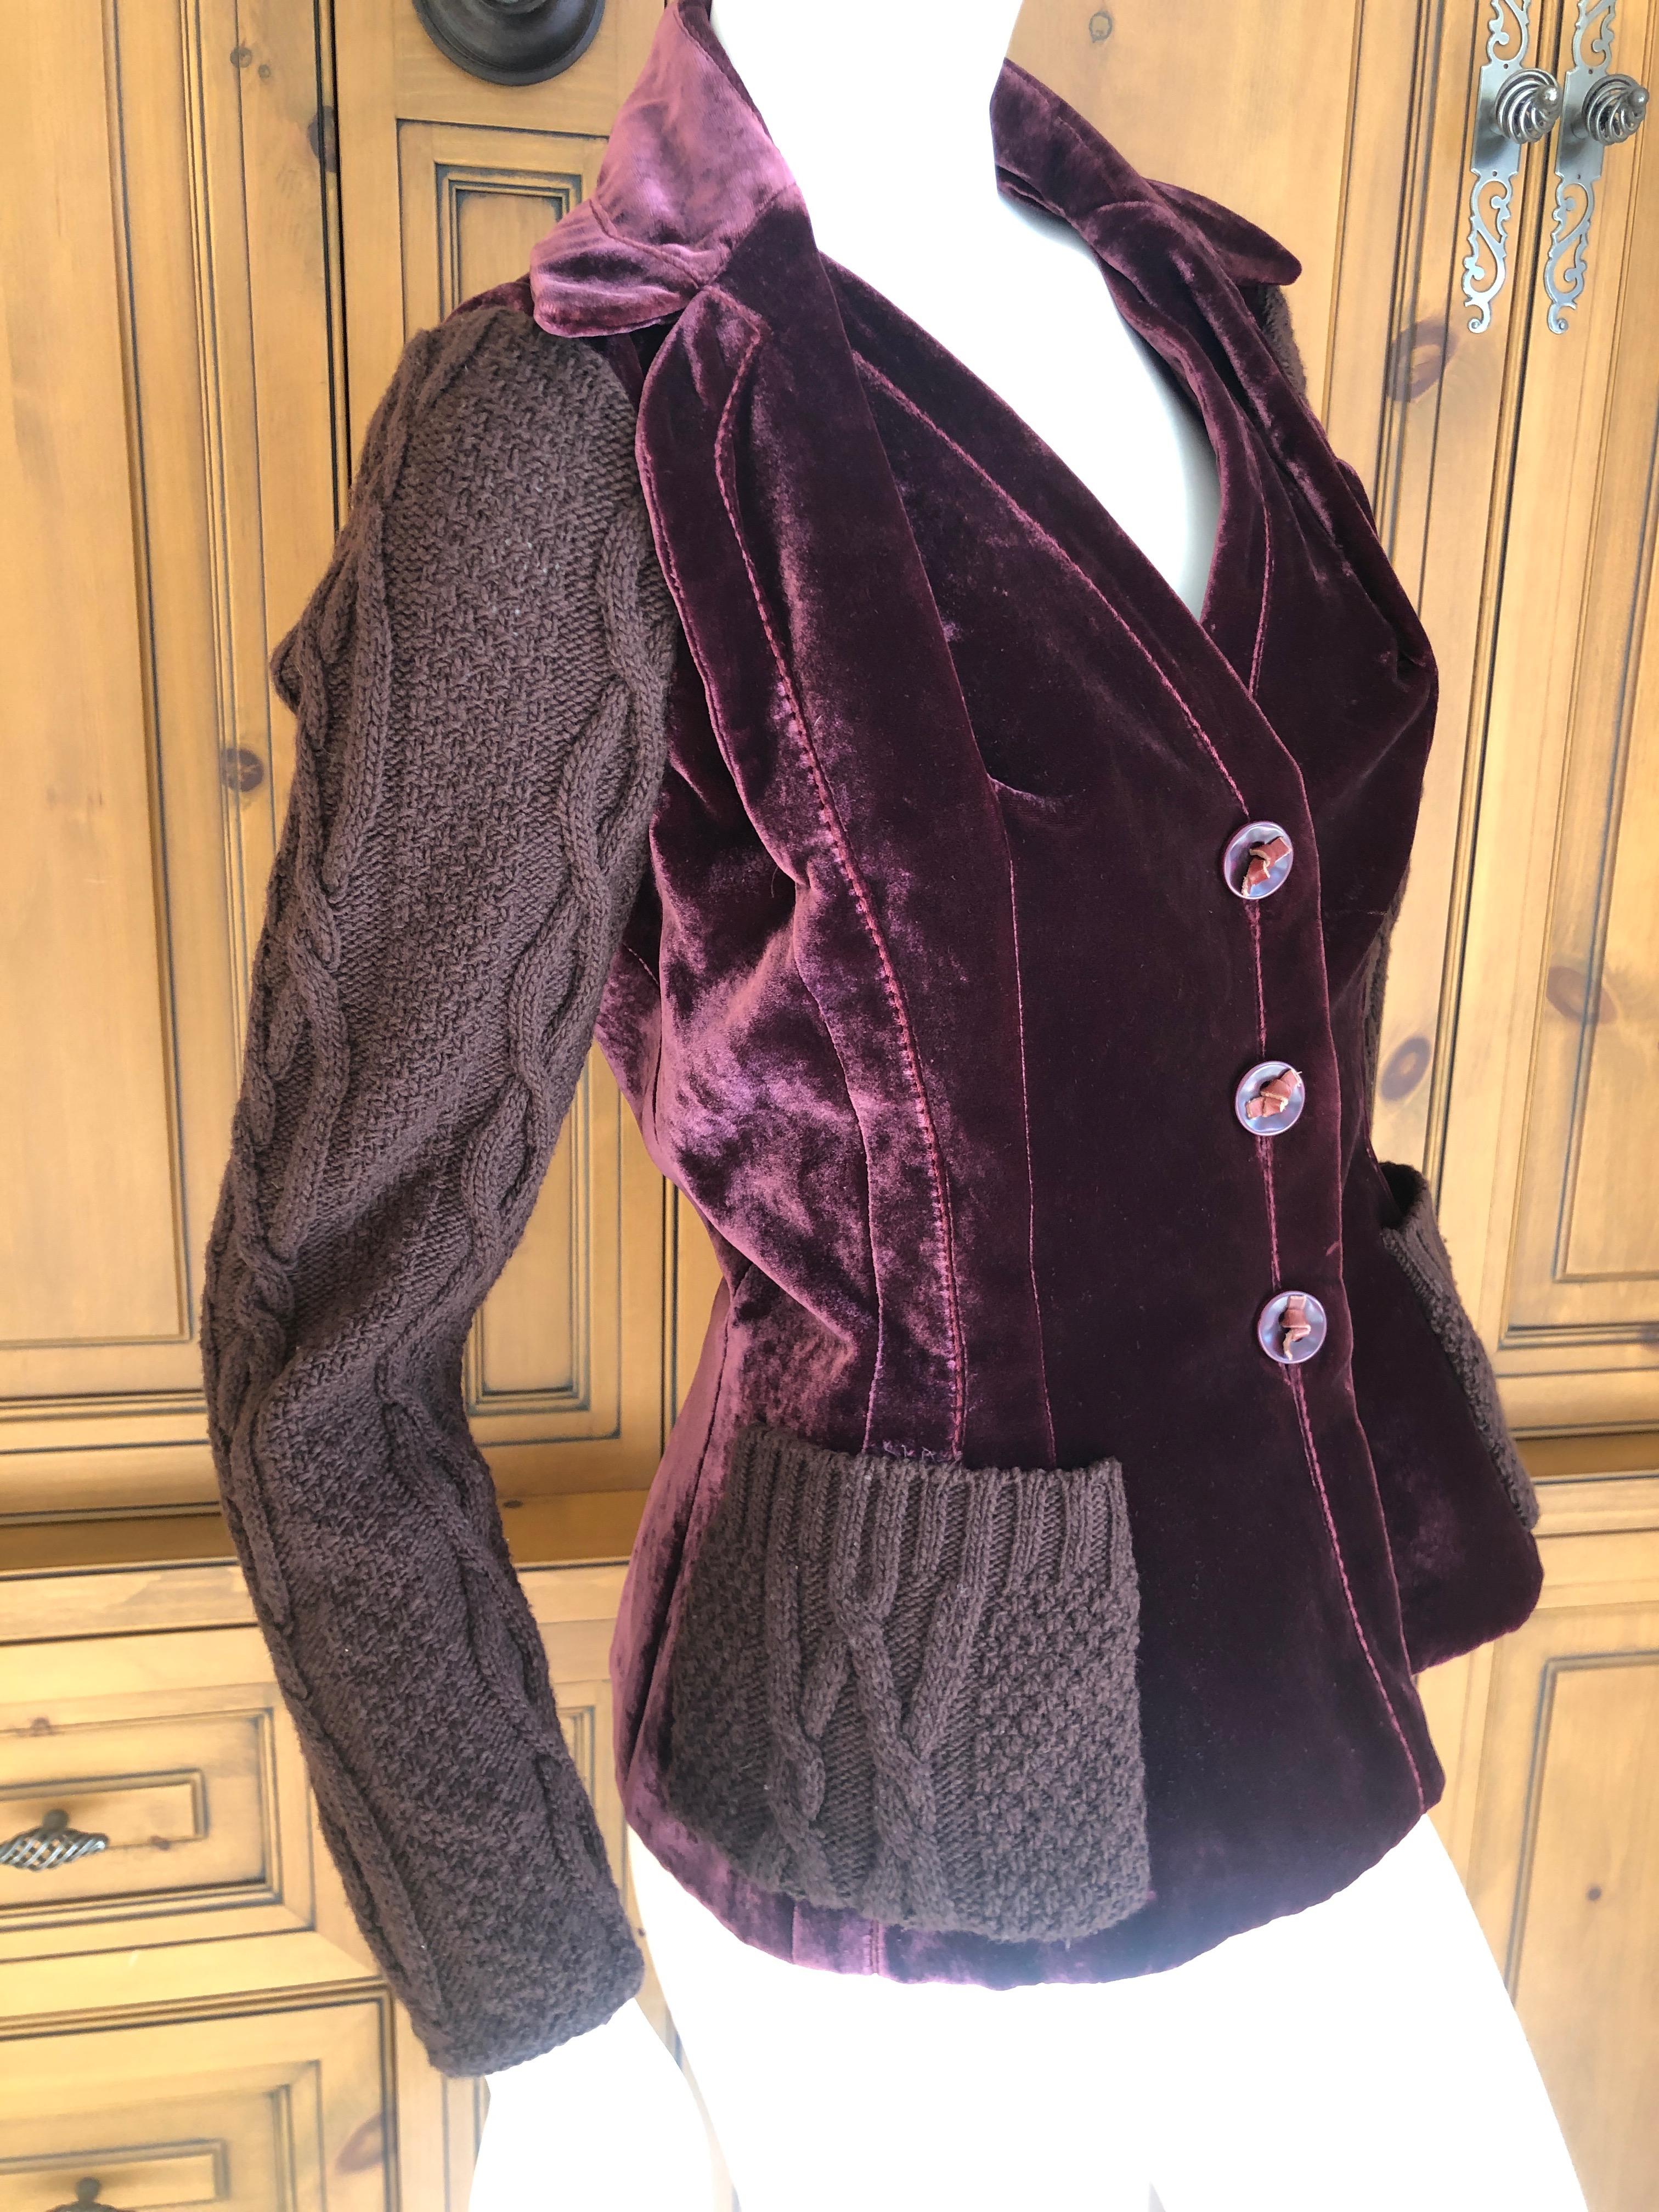 Christian Dior by John Galliano Burgundy Velvet Bar Jacket w Cable Knit Details For Sale 2